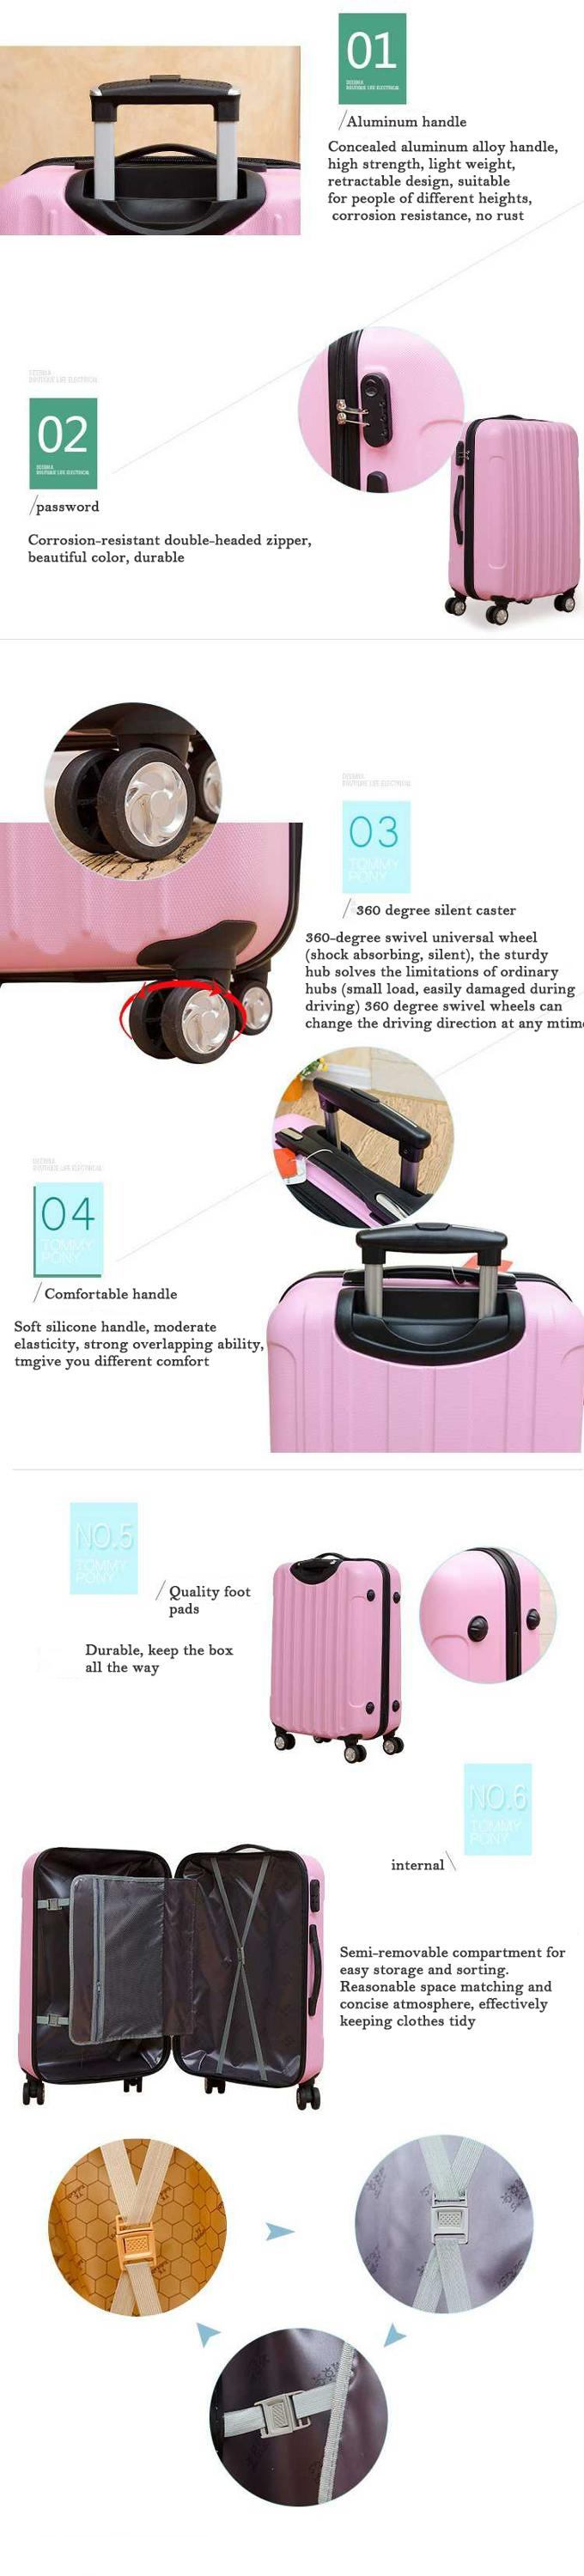 All Pass 2020 Gift Promotion 13 Color OEM Drop Ship Custom Logo Trolley Luggage Luggage Sets ABS Luggage